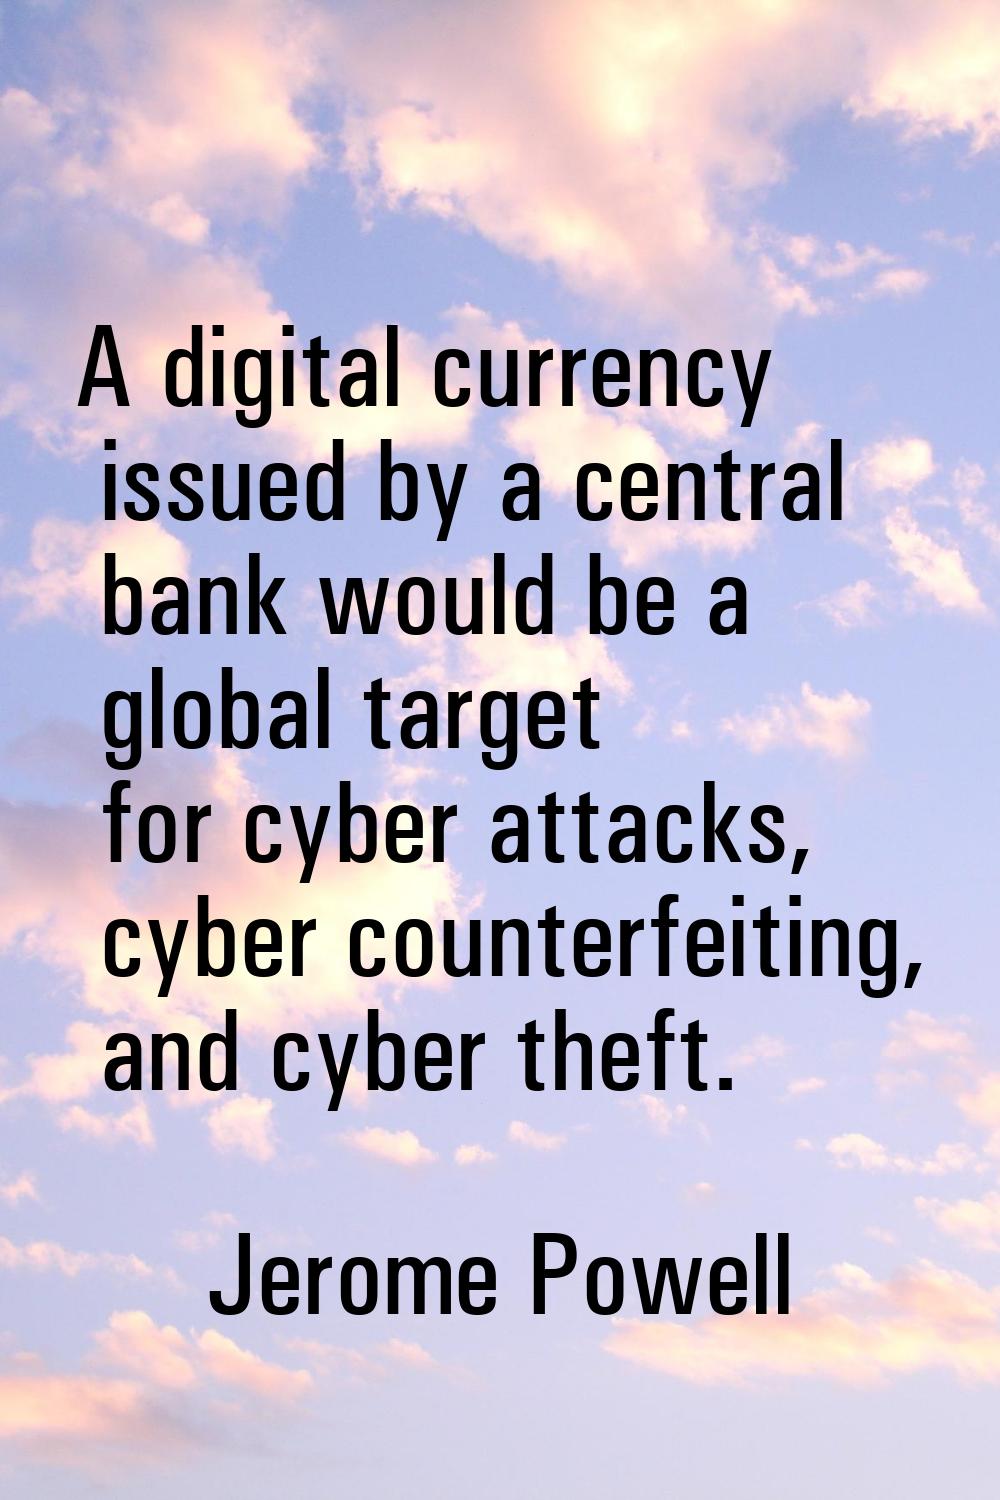 A digital currency issued by a central bank would be a global target for cyber attacks, cyber count